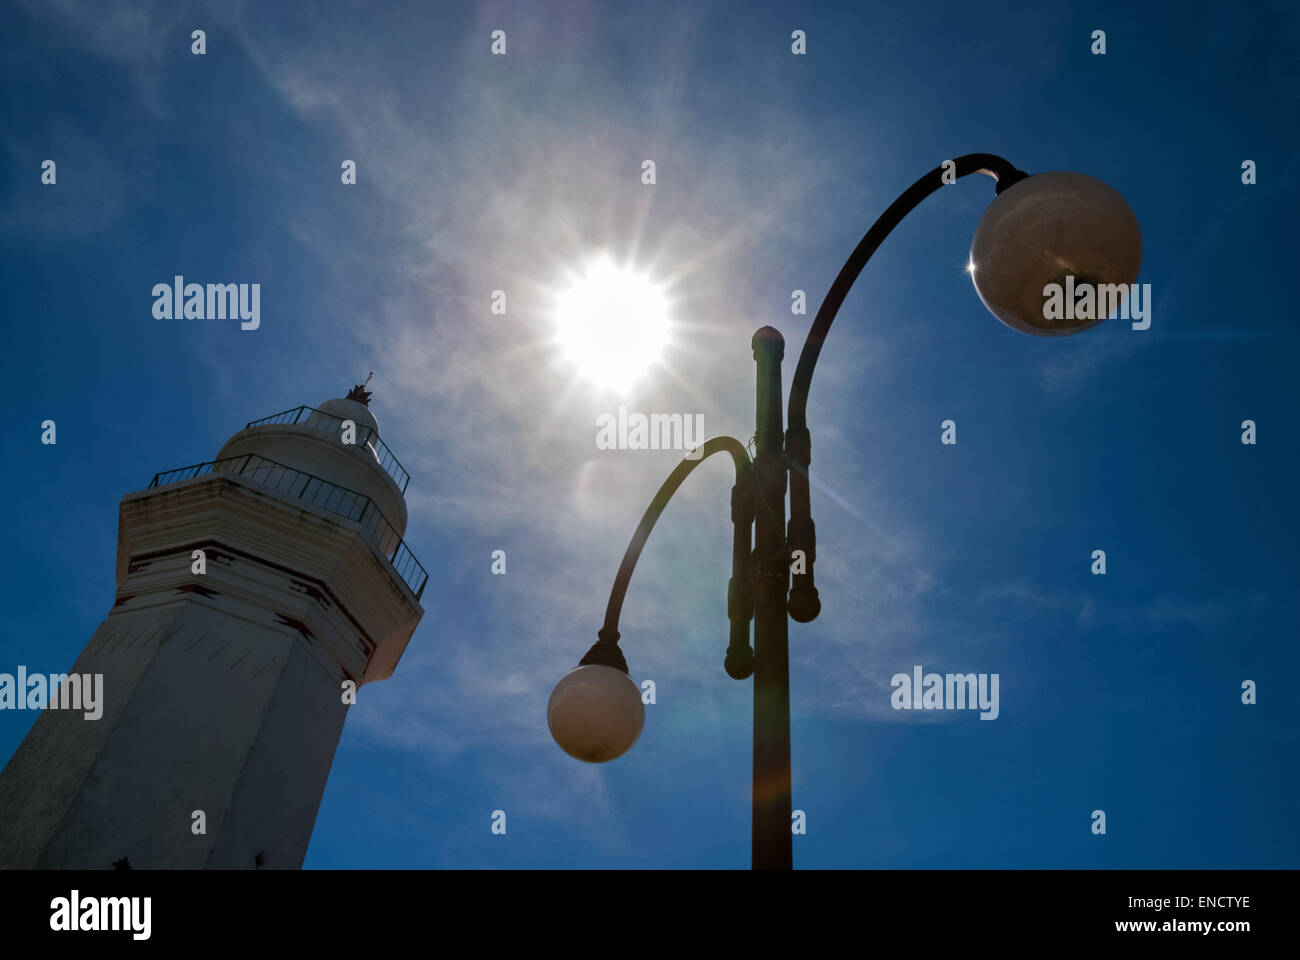 Mosque tower and street lamps silhouetted against the sun. Stock Photo